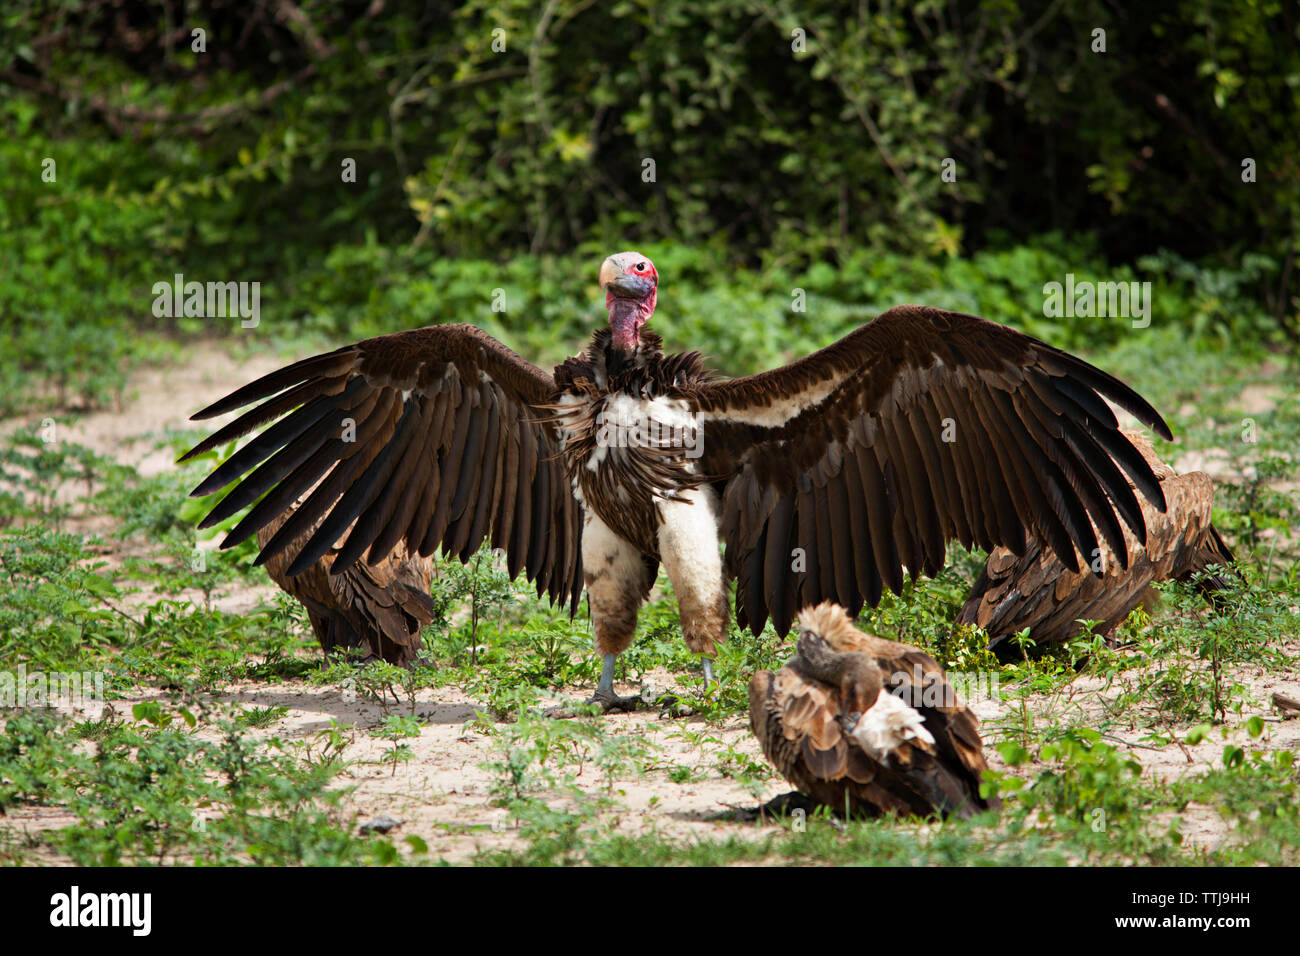 Vultures on grassy field Stock Photo